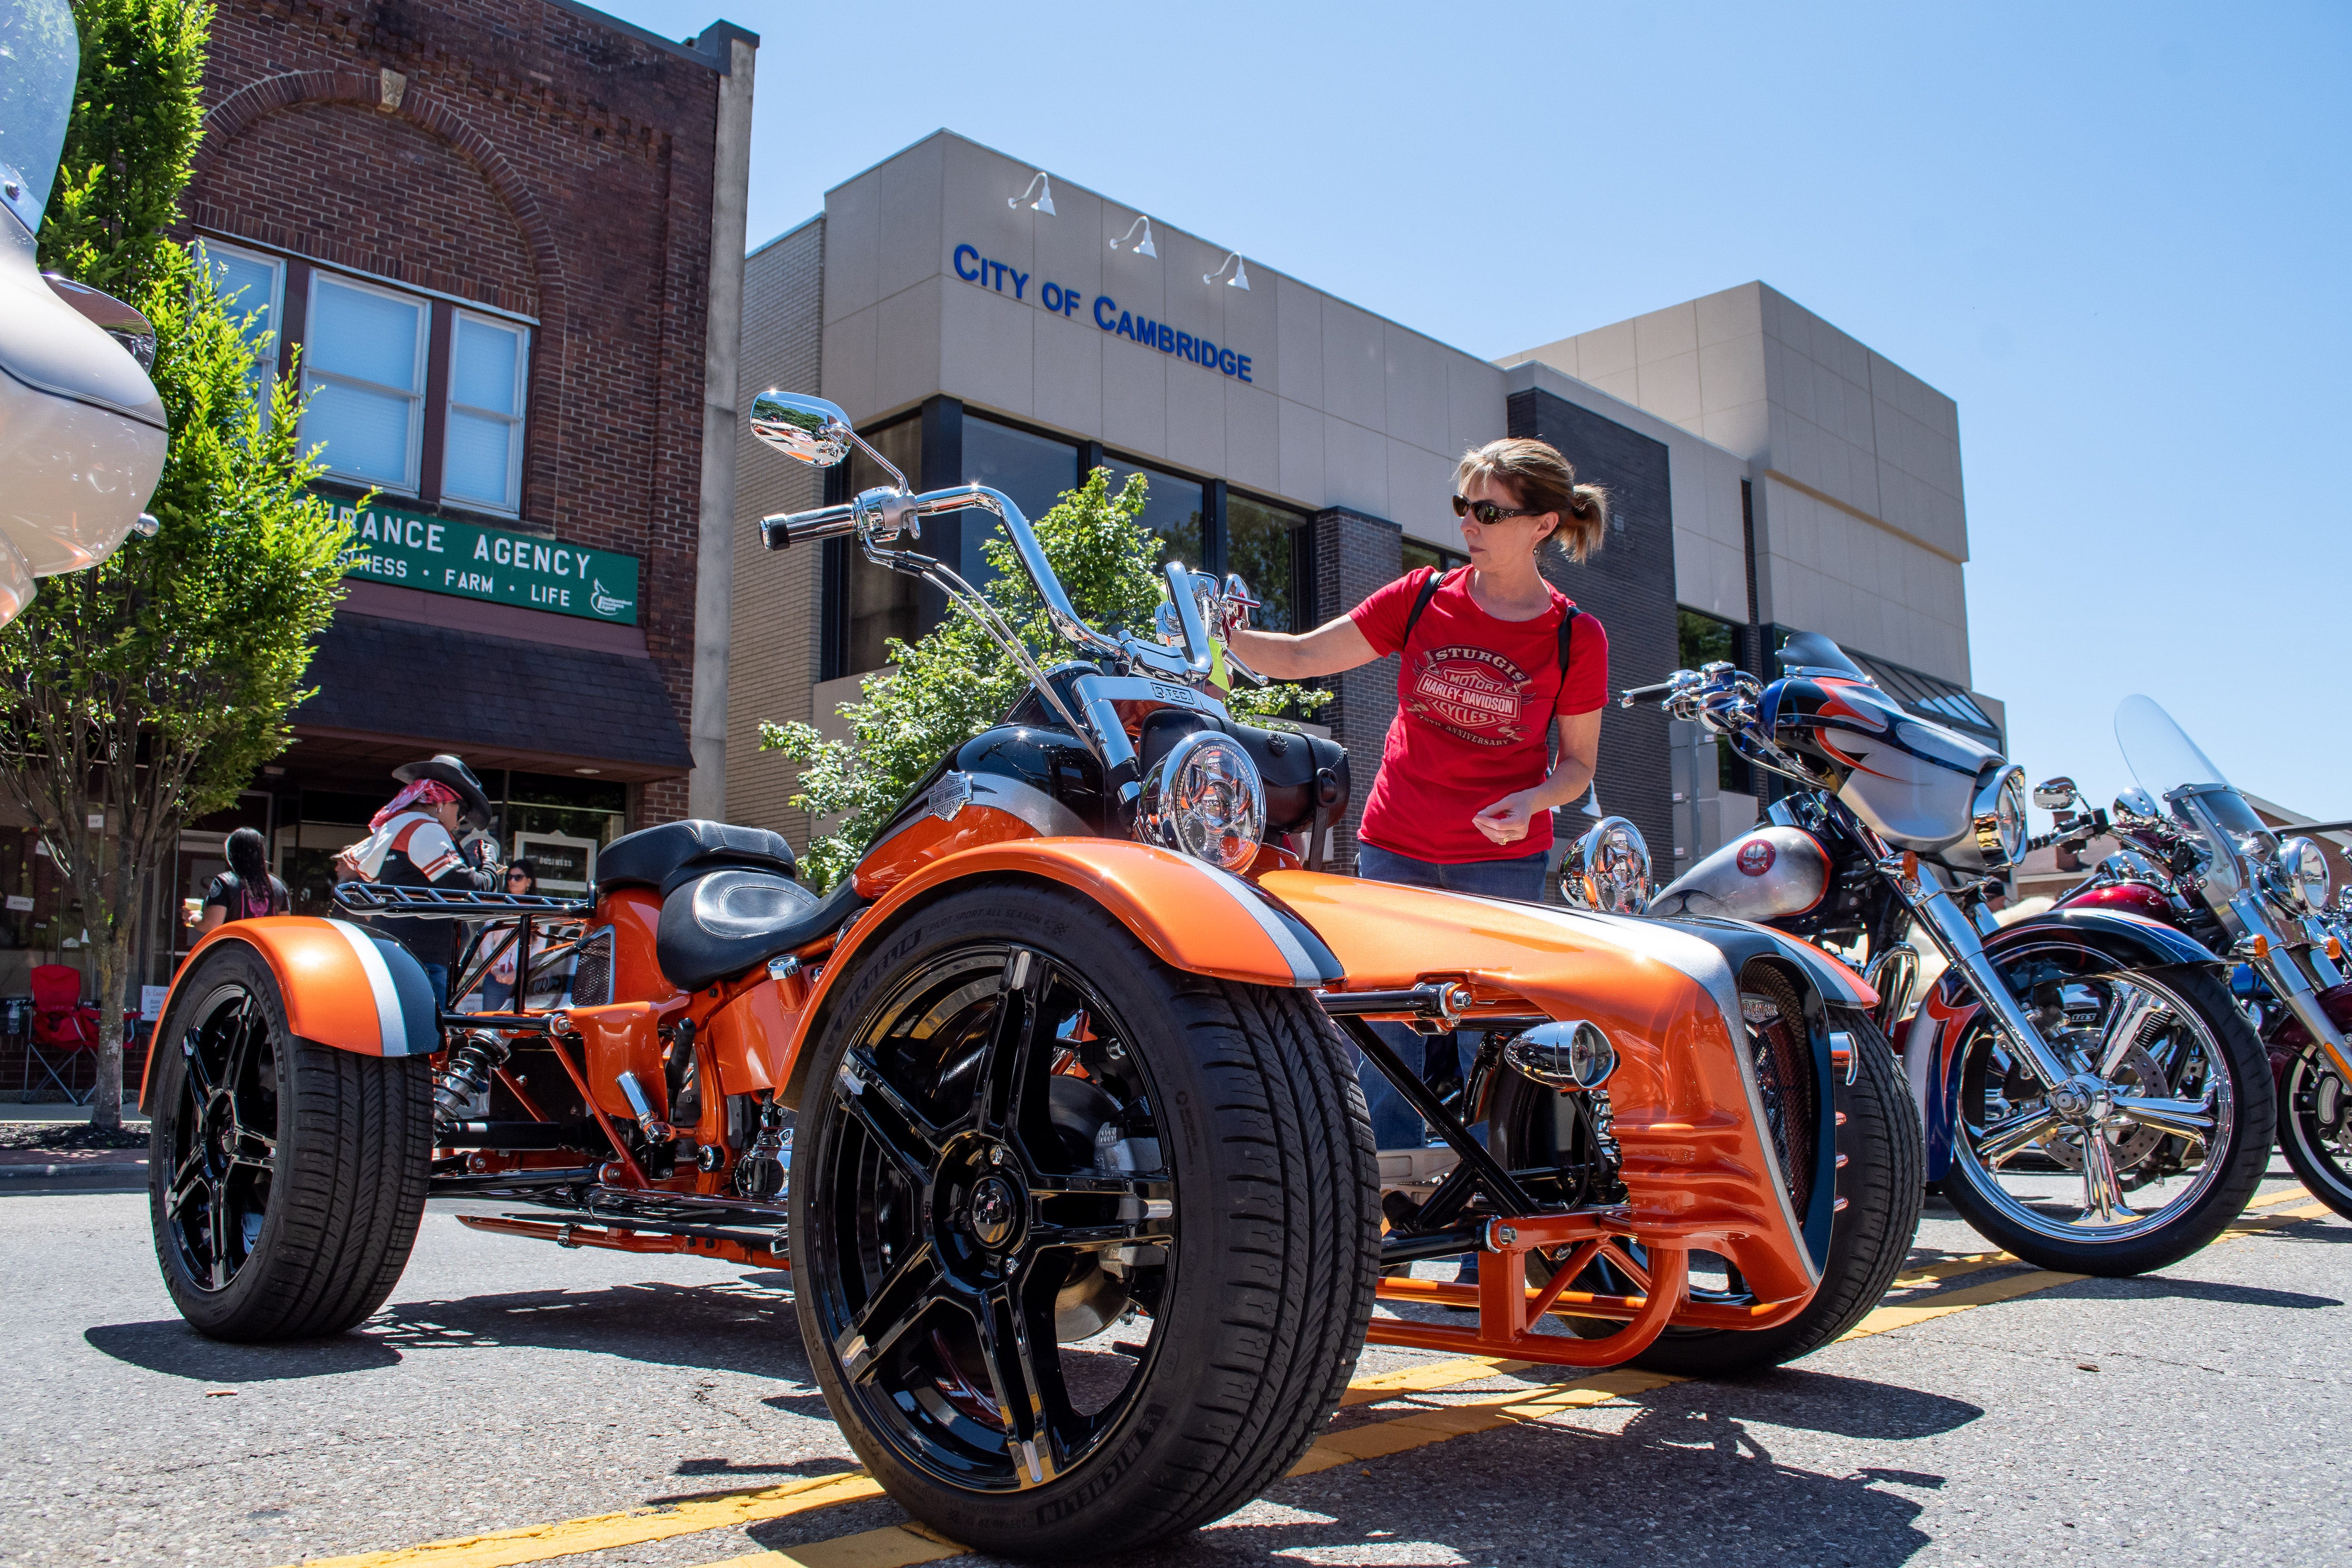 Things to do: National Road Bike show brings hundreds of motorcycles to Cambridge